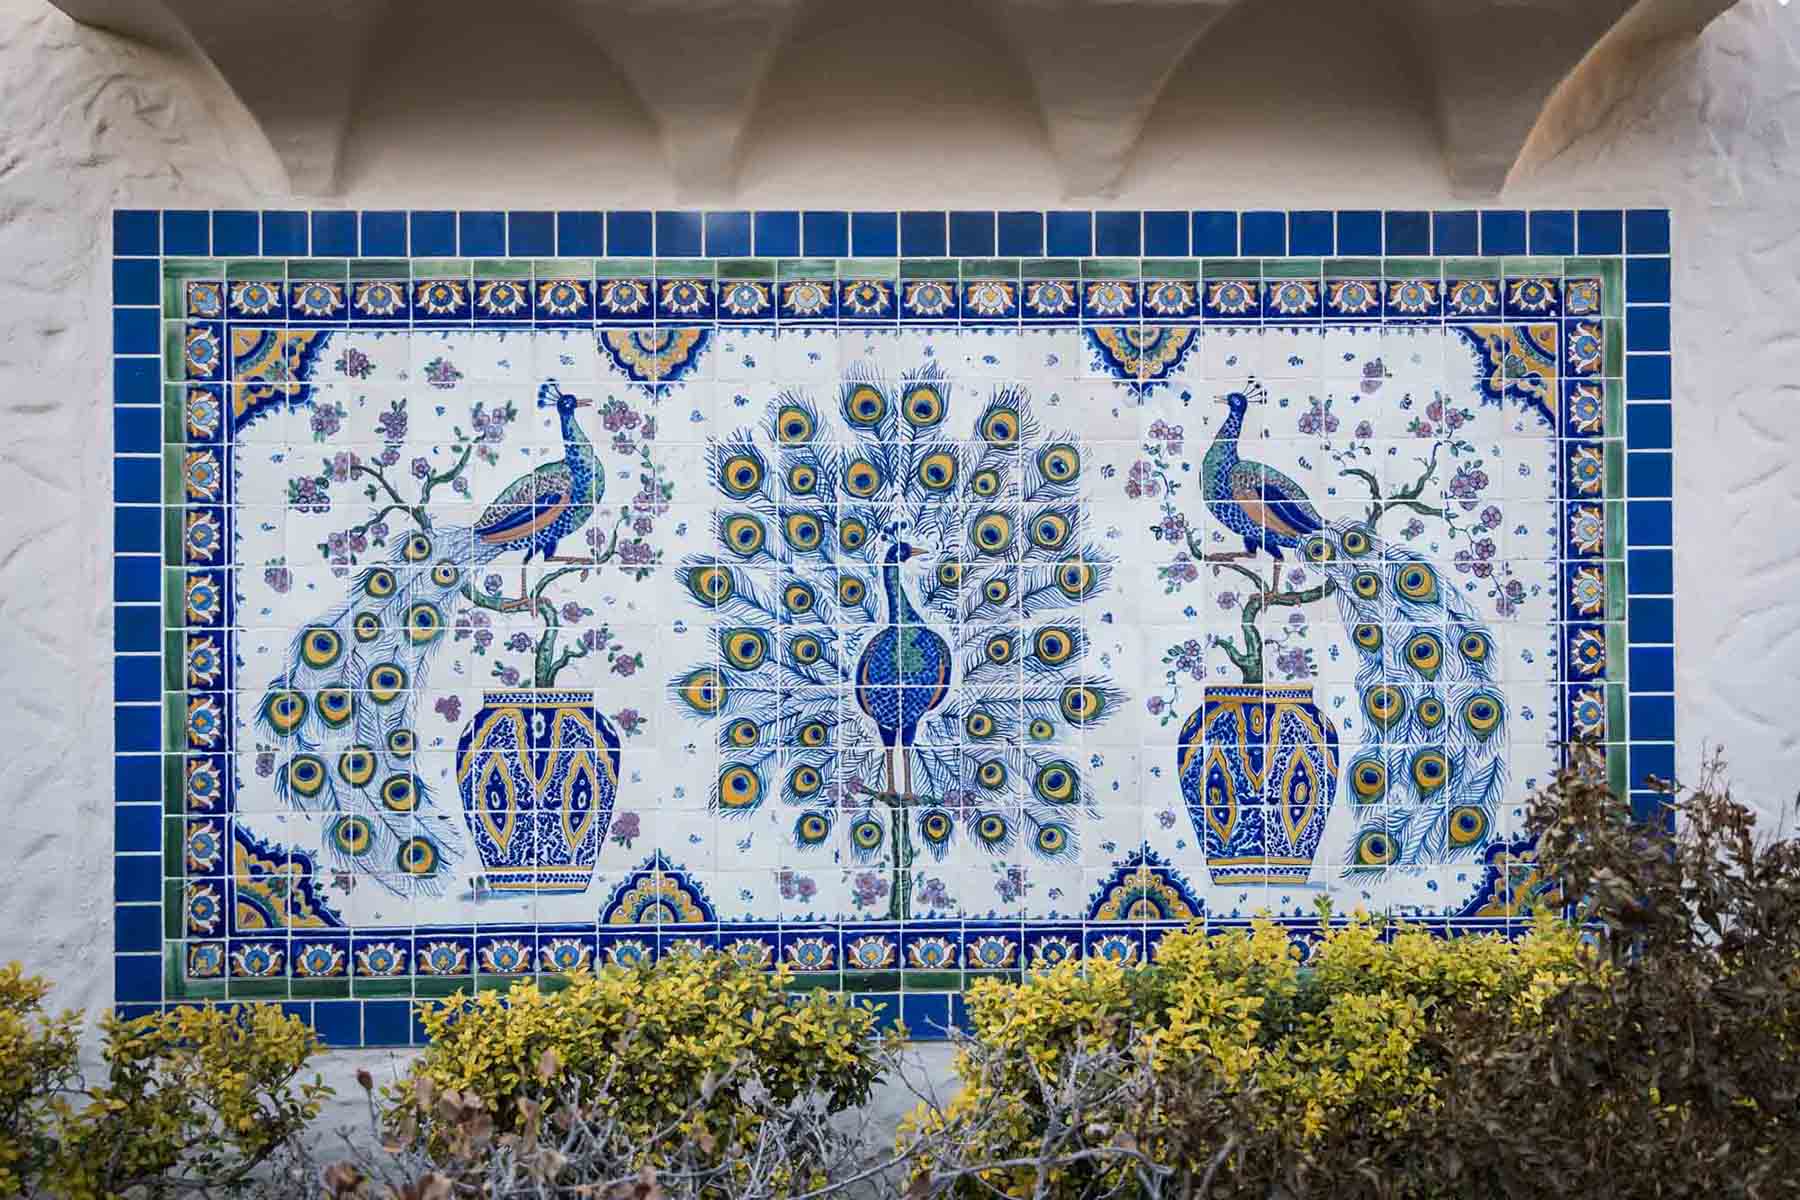 Wall mural of peacocks on tiles in Blackburn Patio for an article on how to take photos at the McNay Art Museum